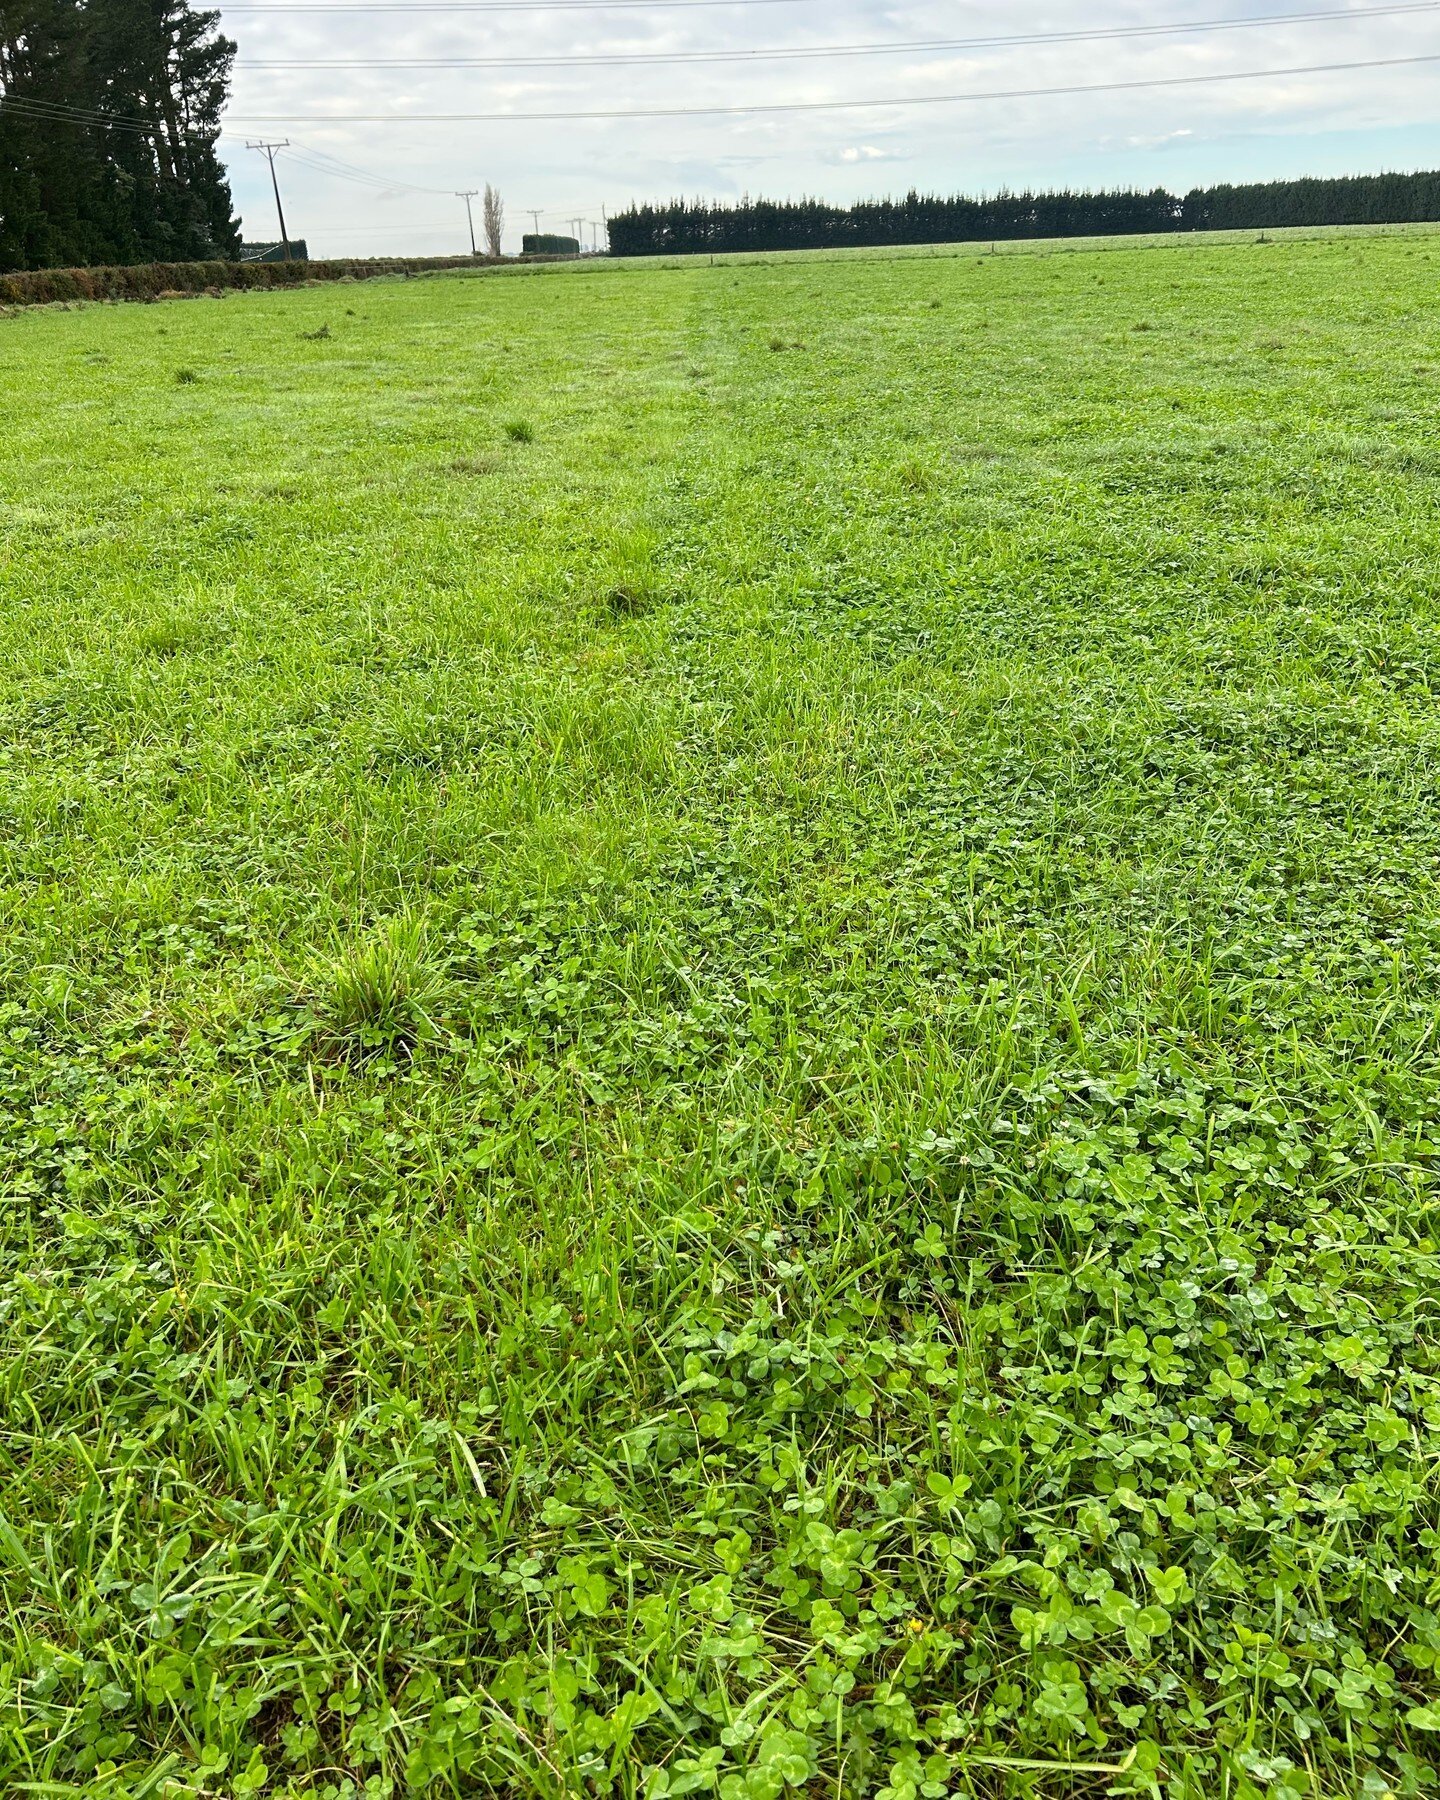 Look close - you&rsquo;ll see where the break fence was. Left break was grazed a bit harder/lower than the break on the right. And a whole lot more clover came back in the right hand break (and with less recovery time!). Shows the impact grazing mana